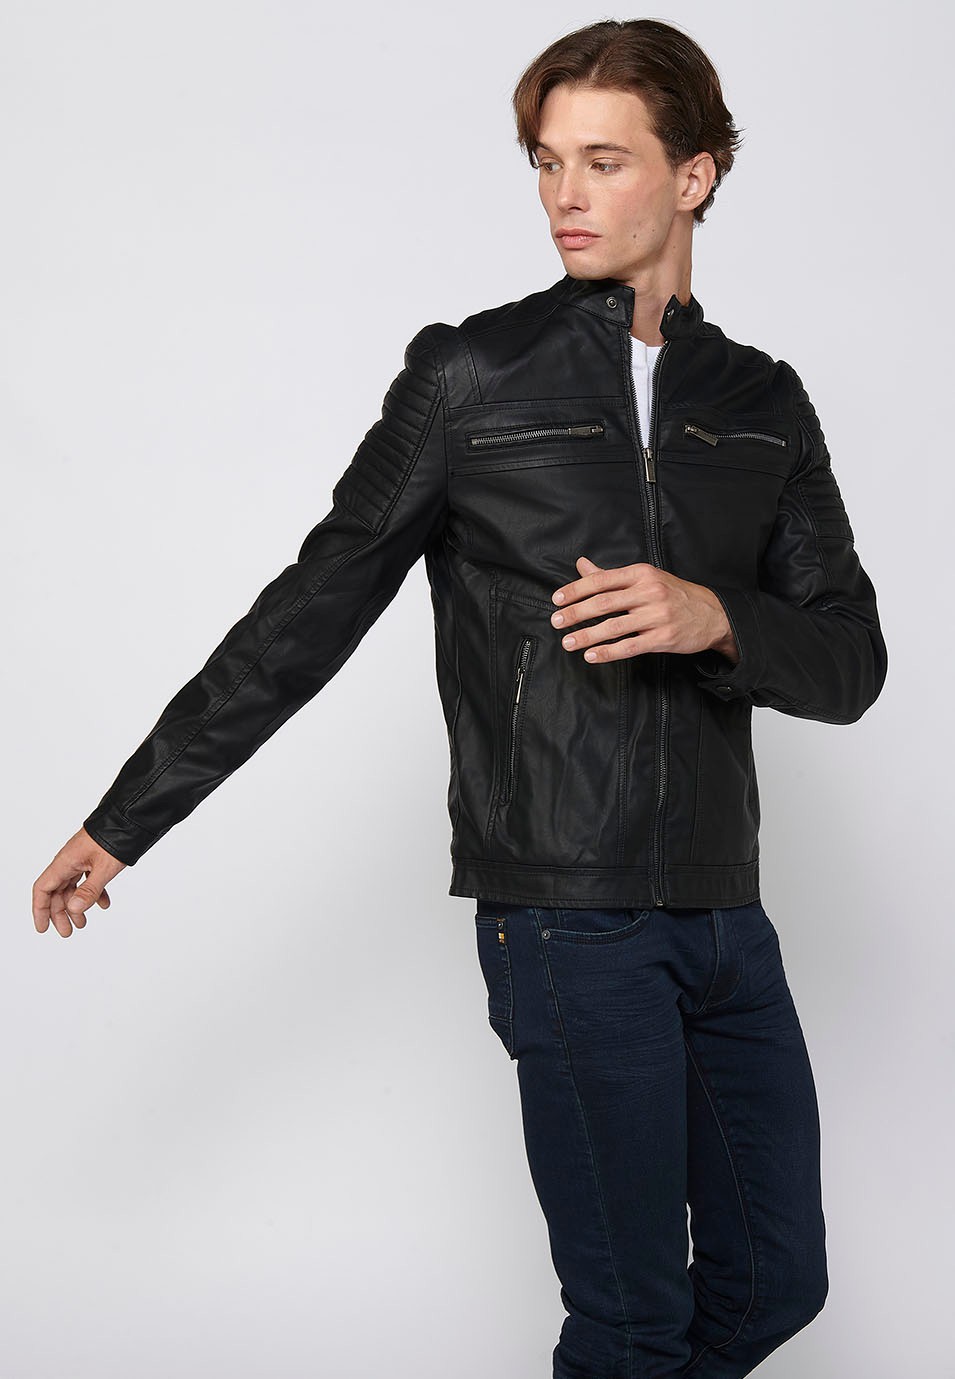 Black Long Sleeve Leather Effect Jacket with Front Zipper Closure and Round Neck for Men